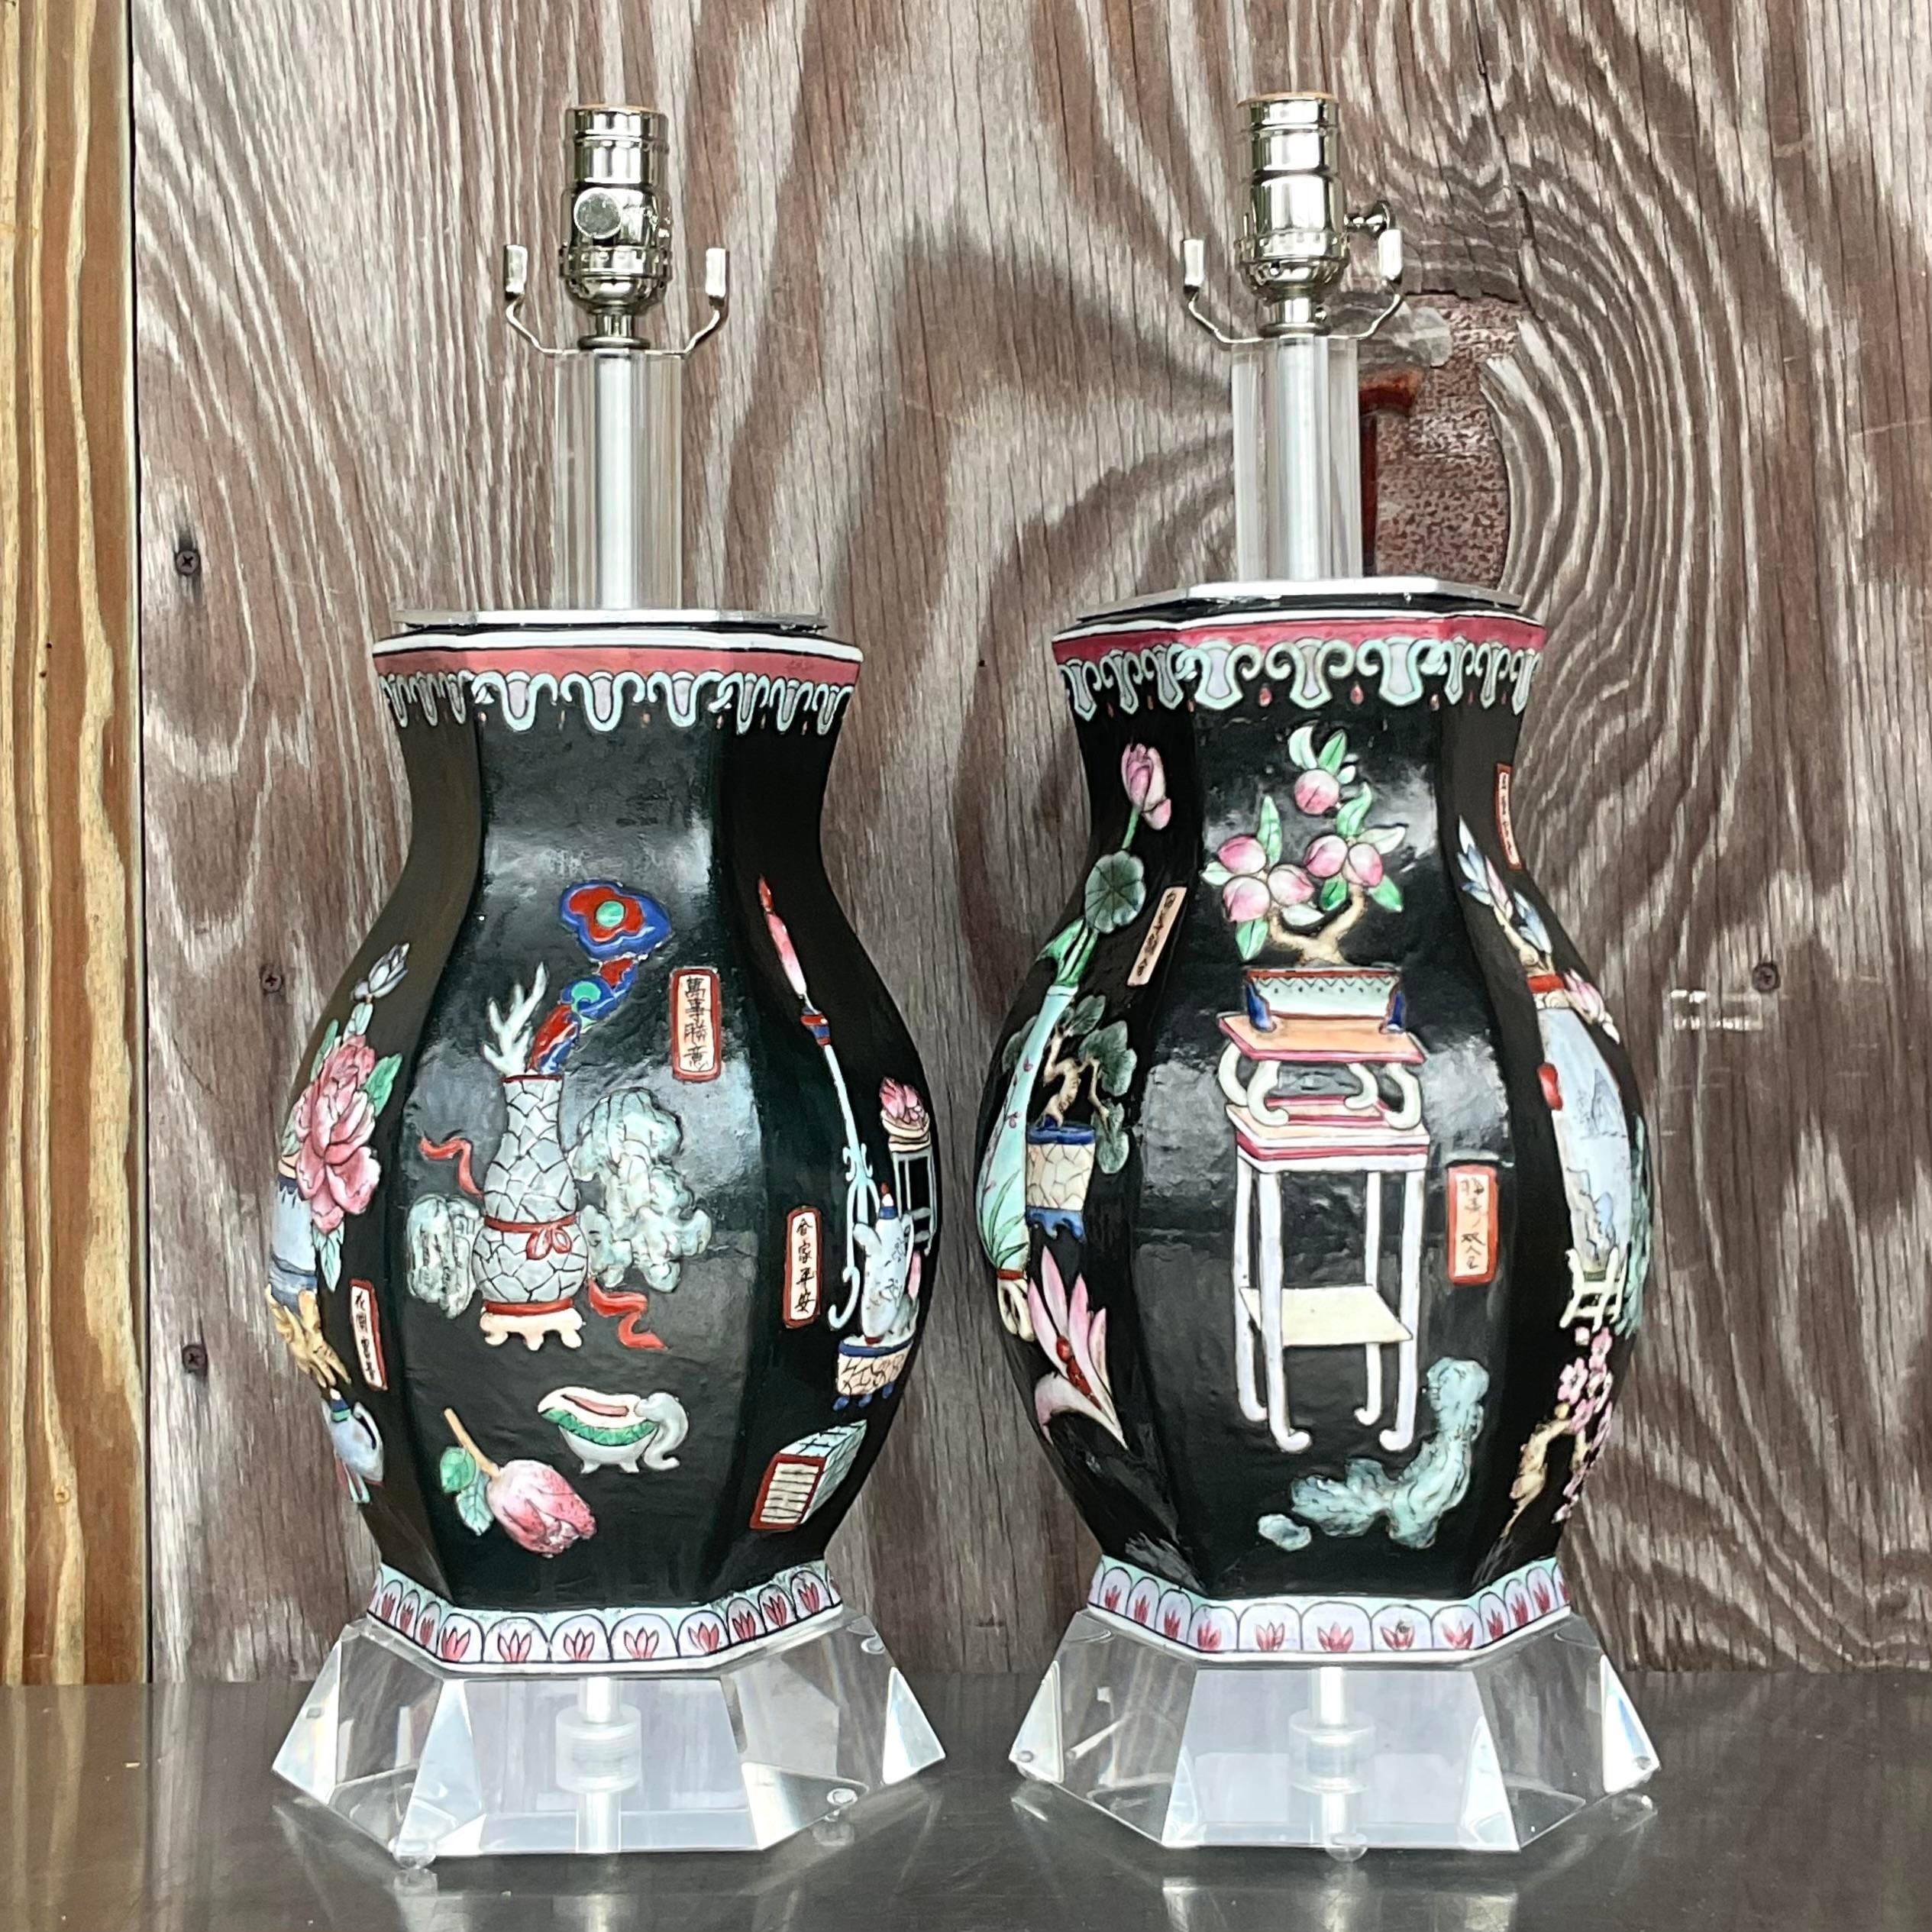 A fabulous pair of vintage table lamps. A chic Chinoiserie relief on a matte black background. A faceted lucite plinth adds to the drama. Acquired from a Palm Beach estate